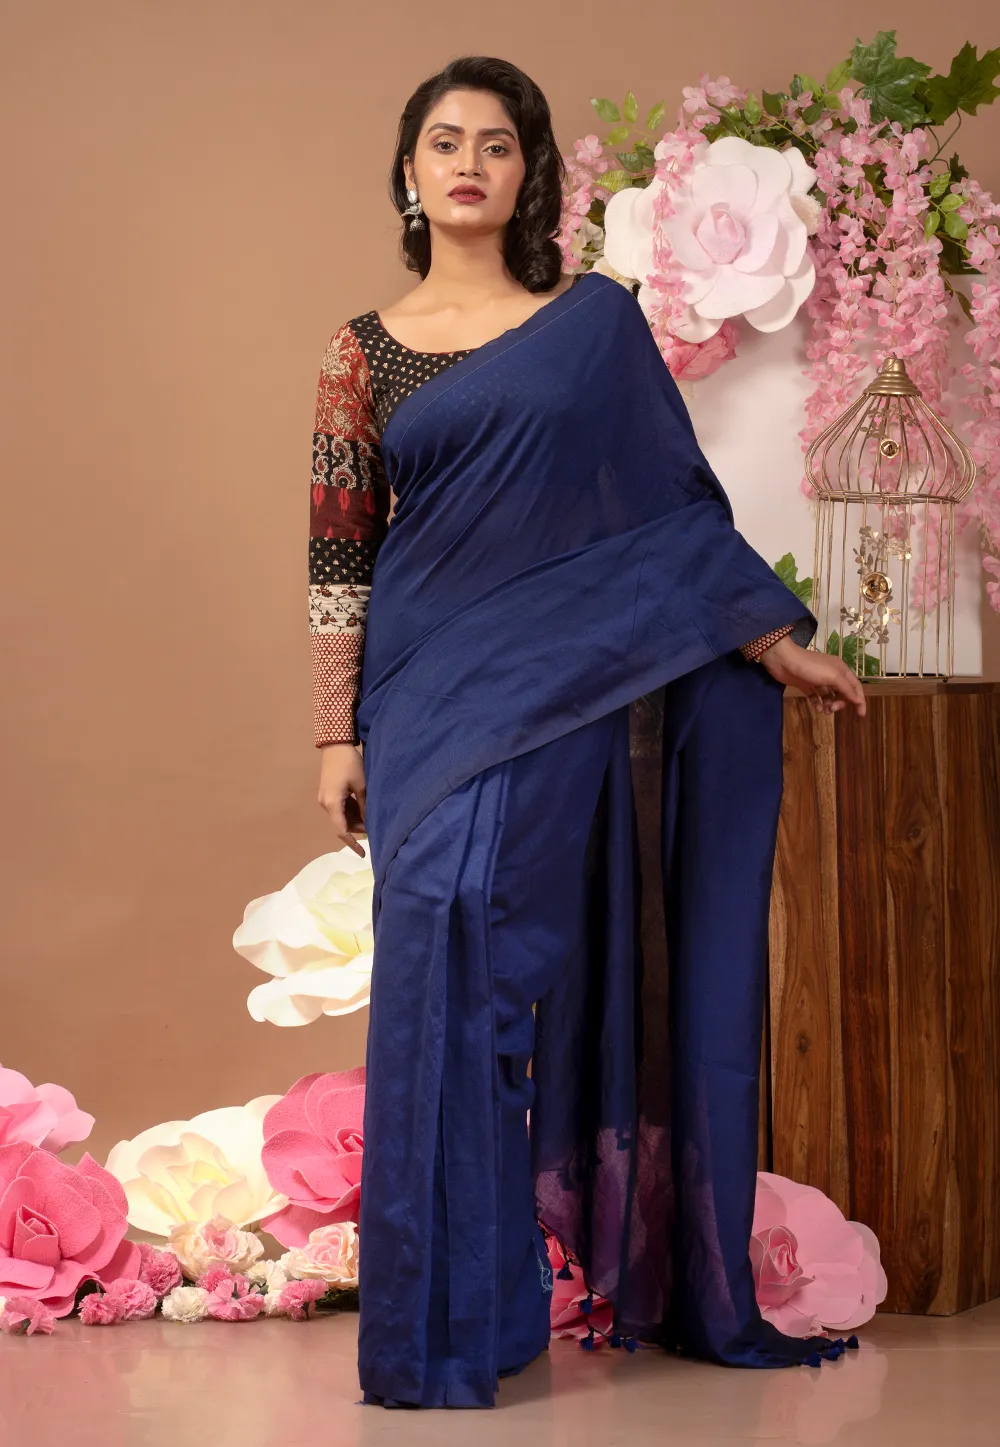 blue blended cotton saree and pallu 6018f4cfb531c 1612248271